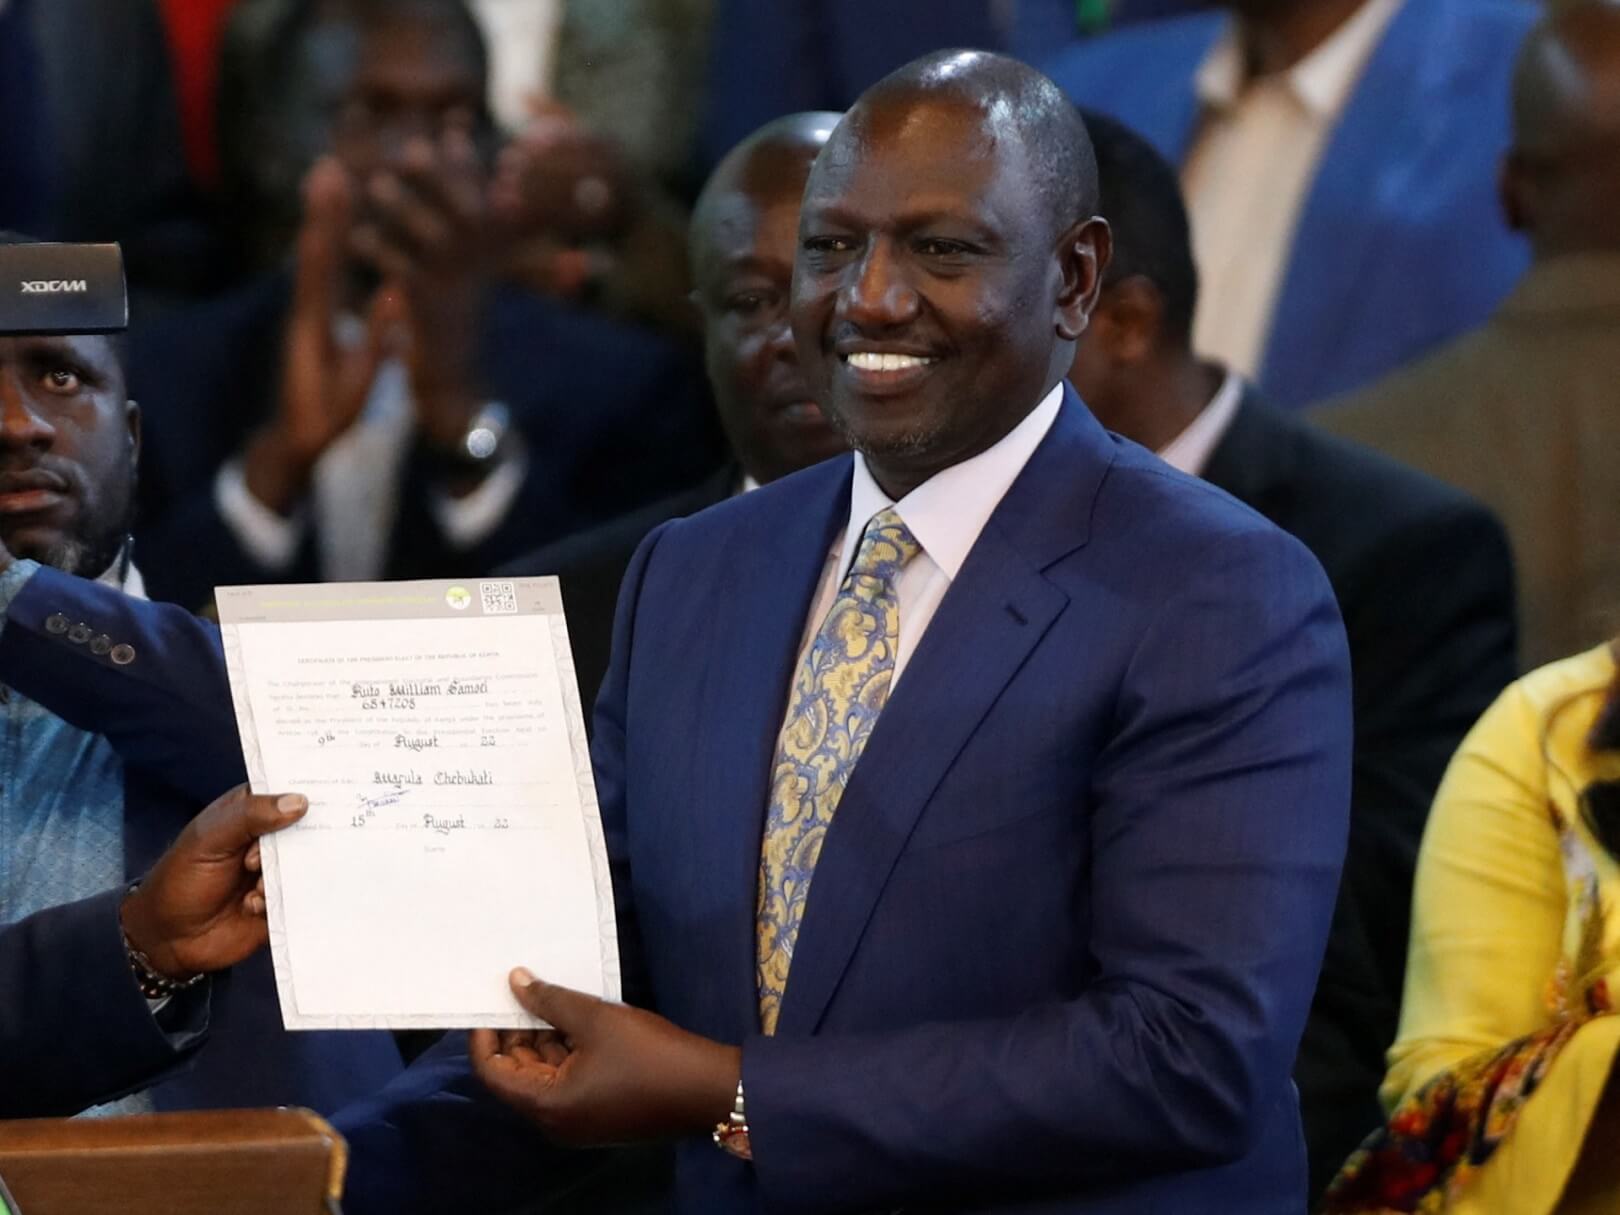 Majority of Kenya’s Election Commission Refuses to Recognise Ruto’s Victory